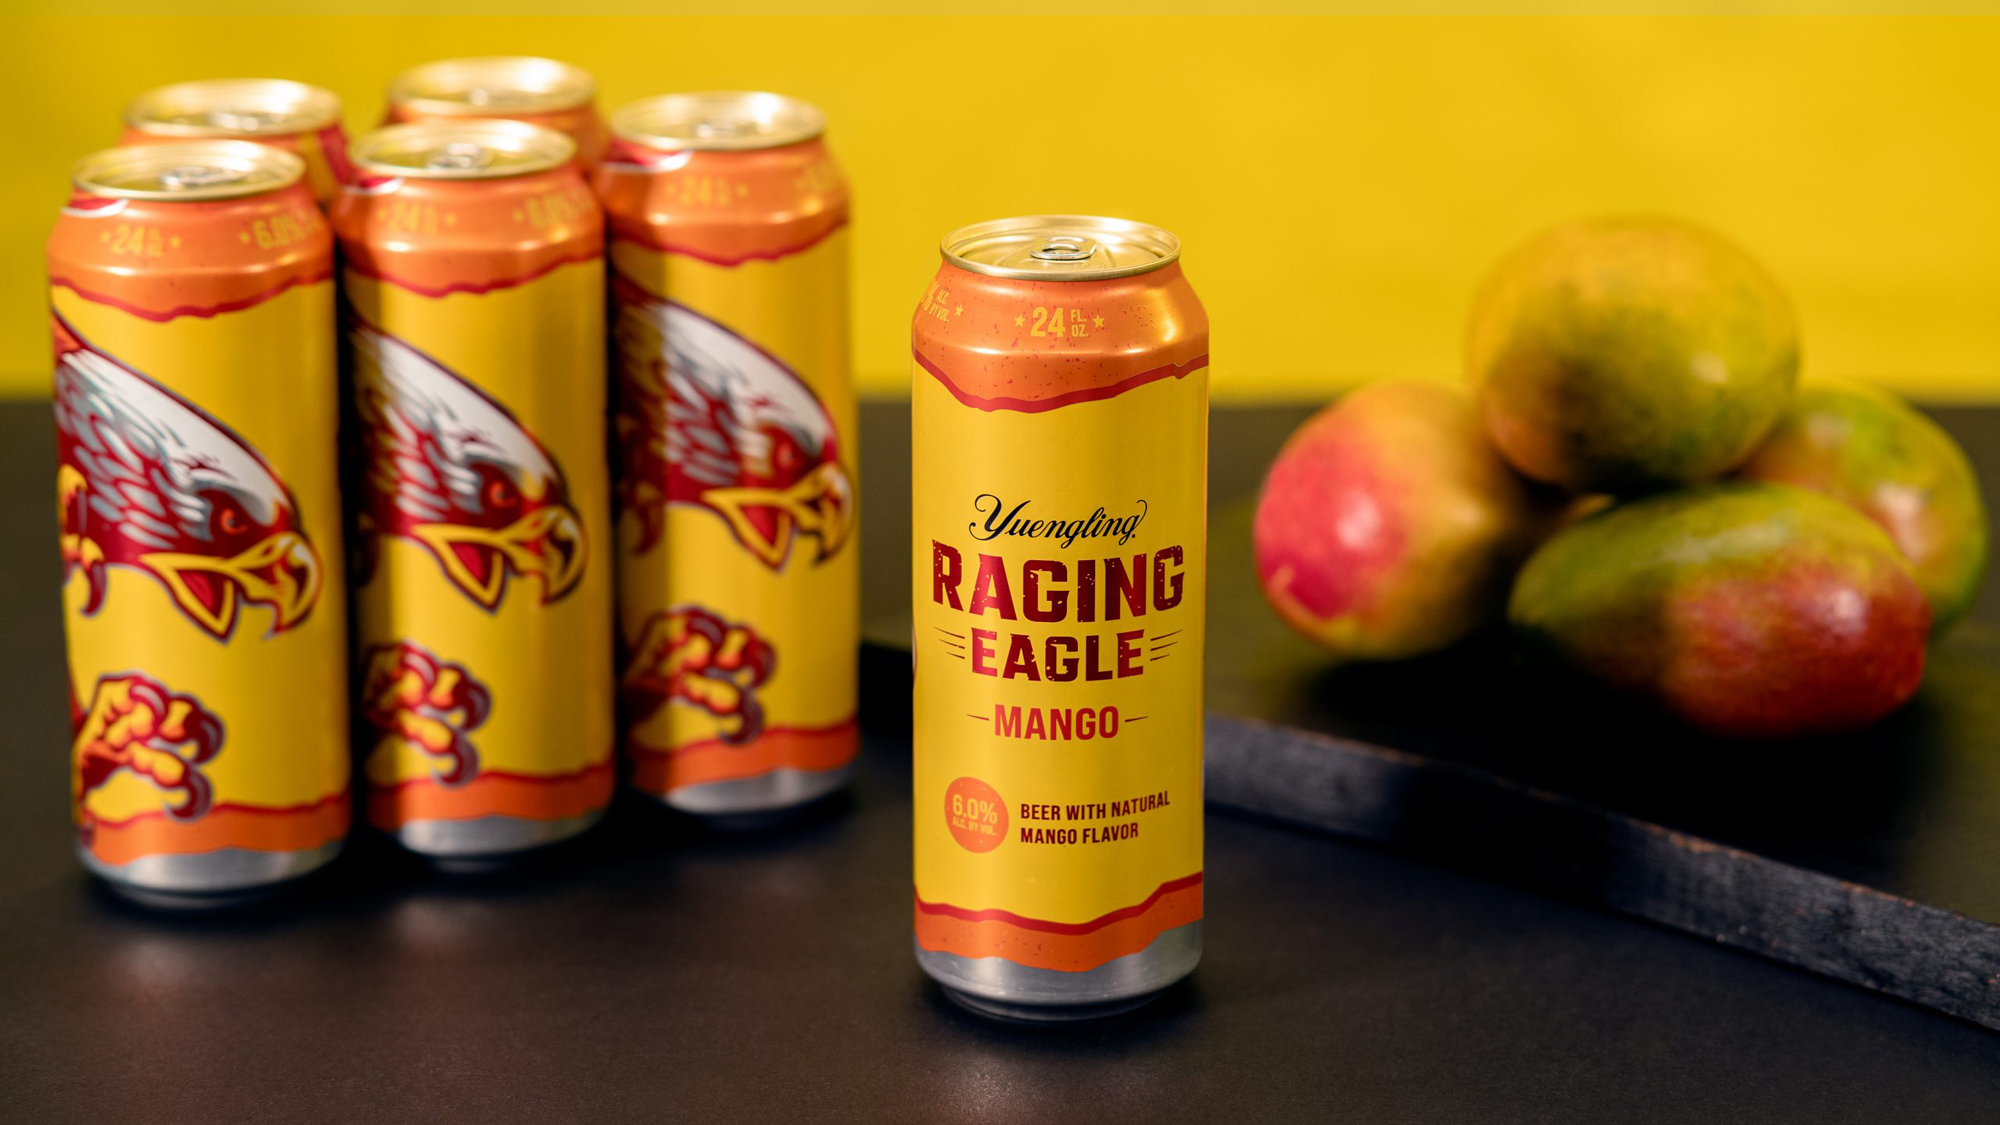 Yuengling launches new Raging Eagle mango beer, available now in 24 oz